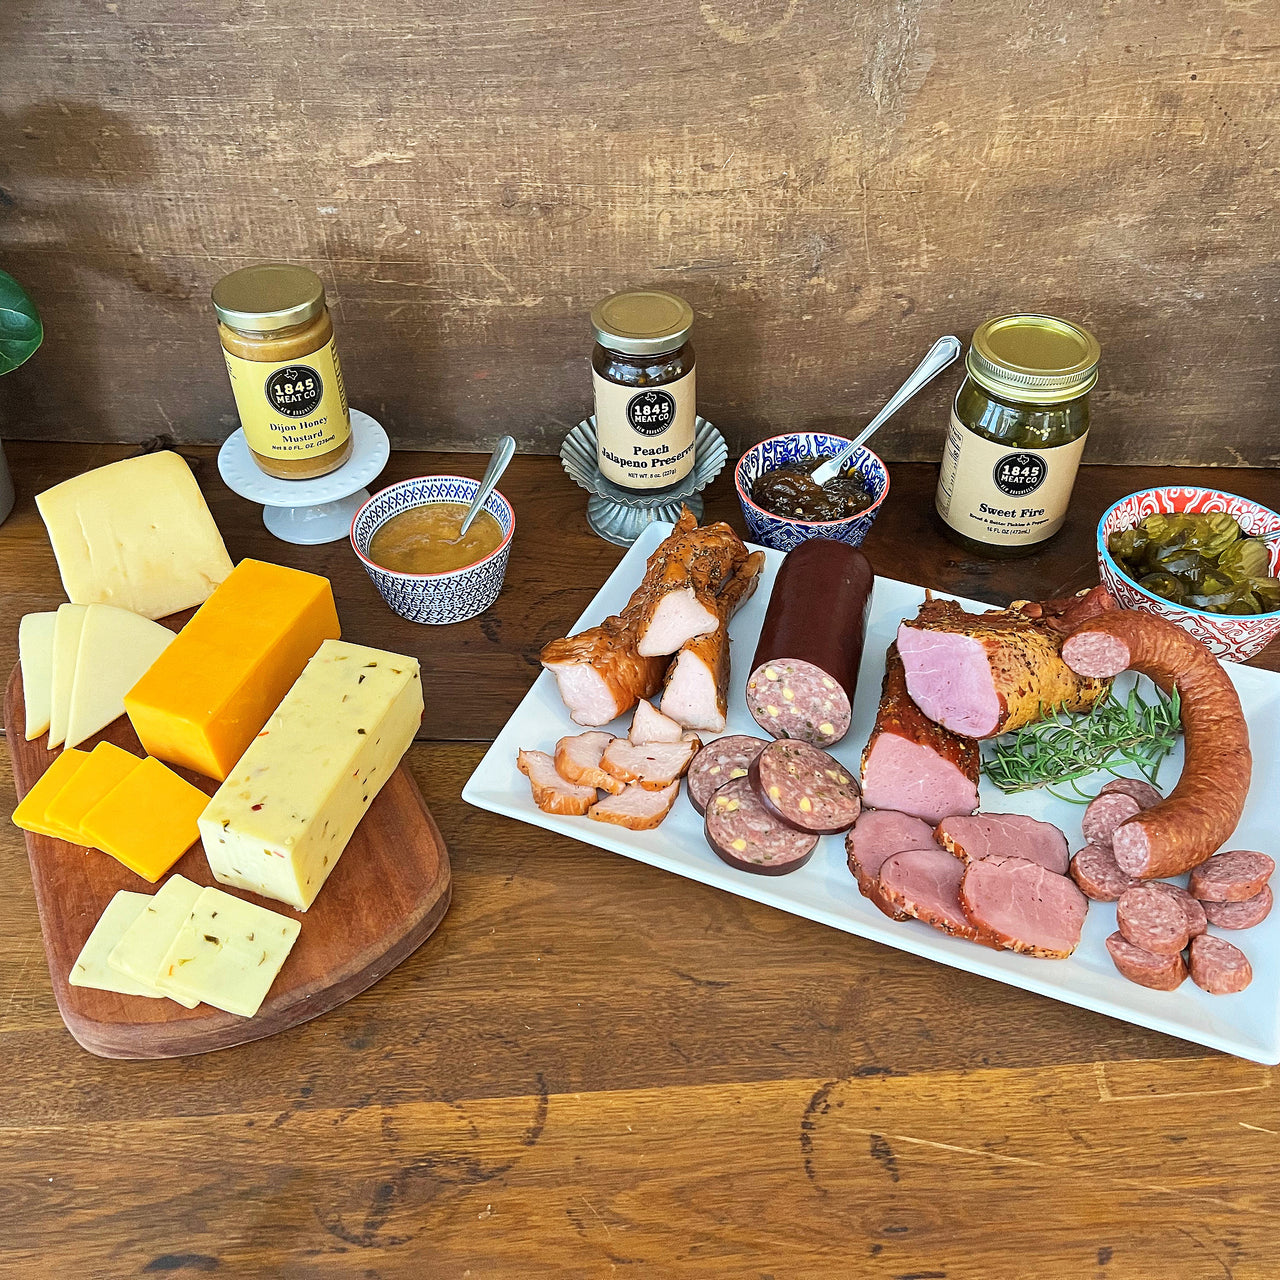 This assortment is a collection of some of our favorites.  Includes:  12 oz. of Smoked Turkey Breast Filet 16 oz. of Pork Tenderloin 12 oz. Cheddar Jalapeno Summer Sausage 8 oz. Dietert Family Pork & Beef Ring Sausage 16 oz. Jar of Sweet Fire Pickles 8 oz. Jar of Peach Jalapeno Preserves 8 oz. Jar of Honey Dijon Mustard 8 oz. Smoked Cheddar Cheese 8 oz. Smoked Pepper Jack Cheese 10 oz. Smoked Baby Swiss Cheese ﻿Item #30E